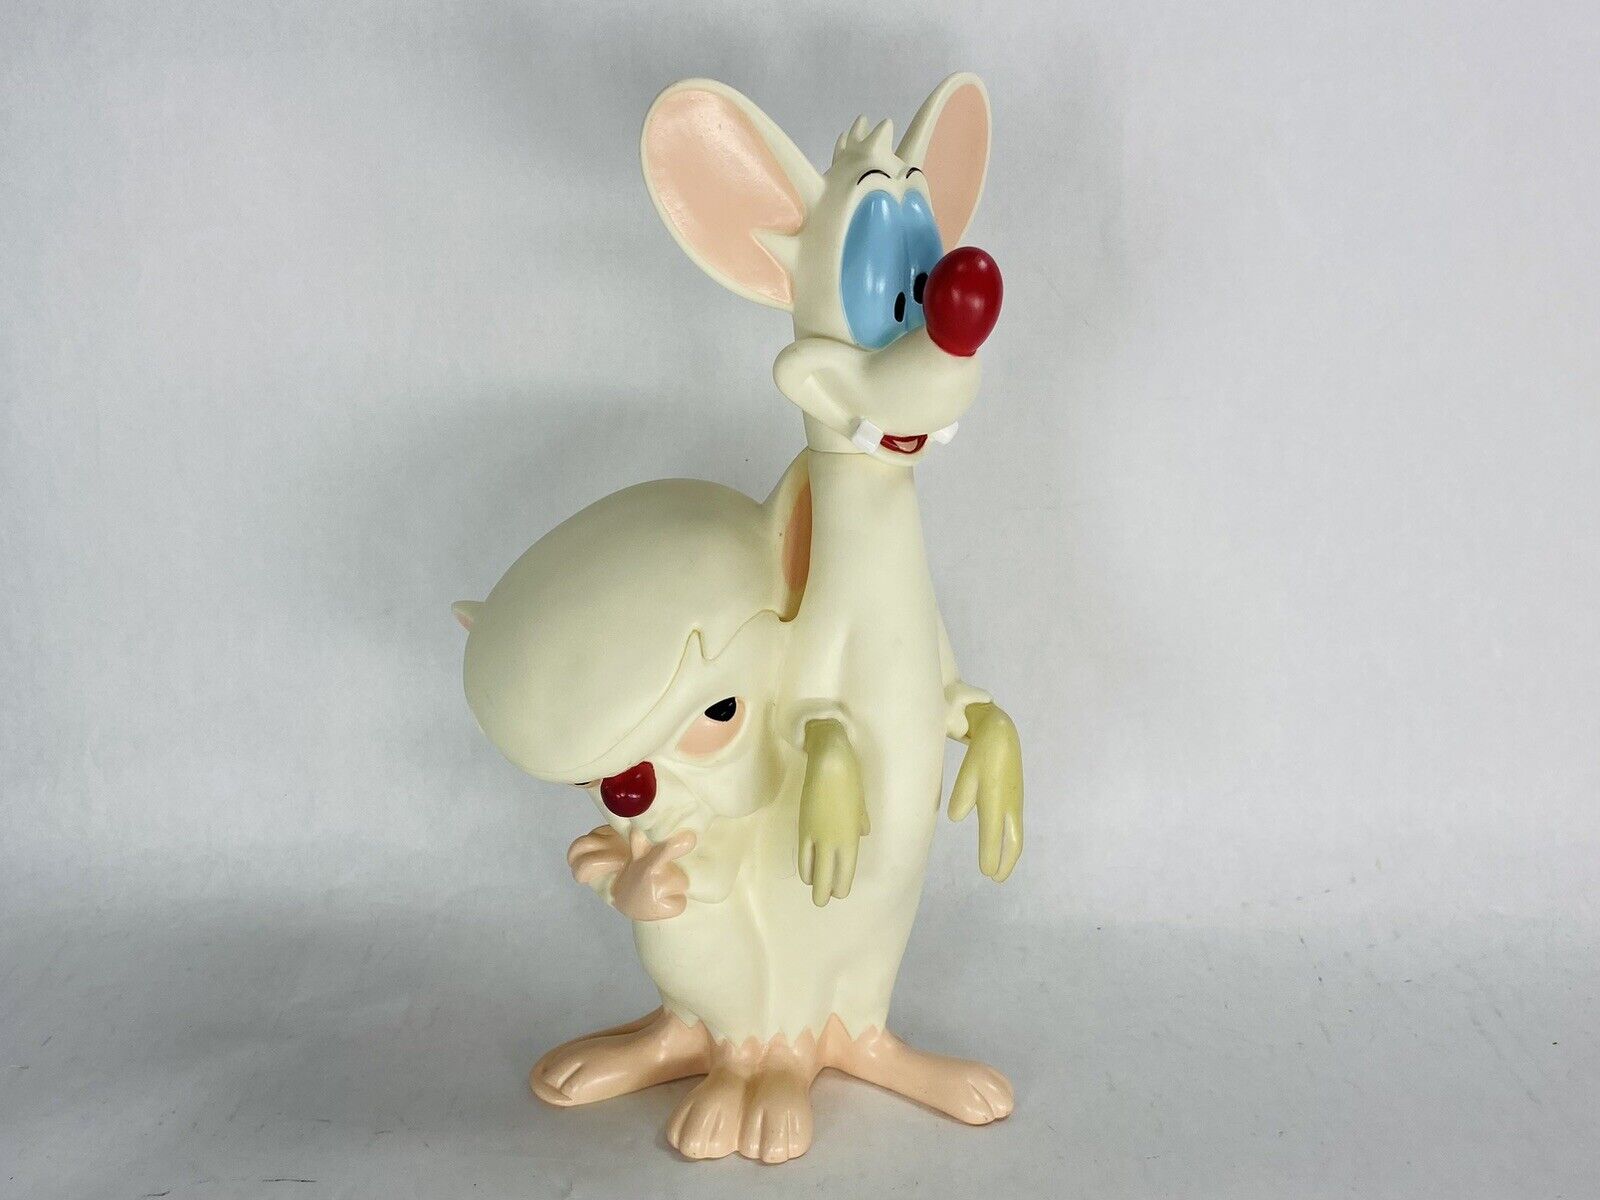 10” - 1995 Warner Bros Pinky and The Brain Together Plastic Figure Turning Head